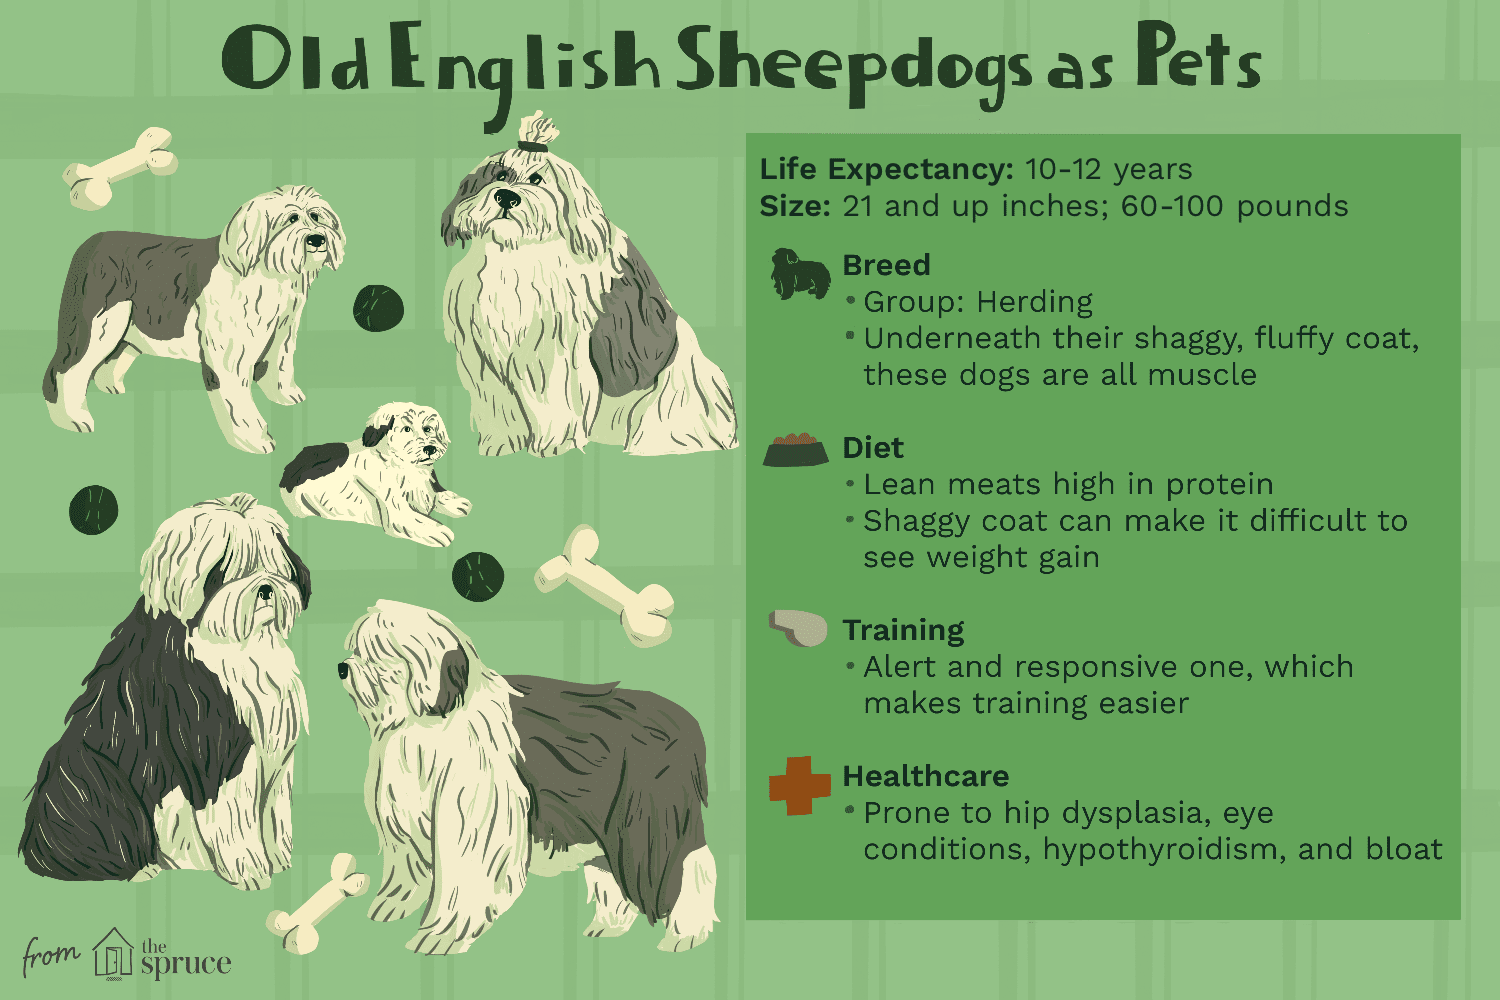 old english sheepdogs as pets illustration